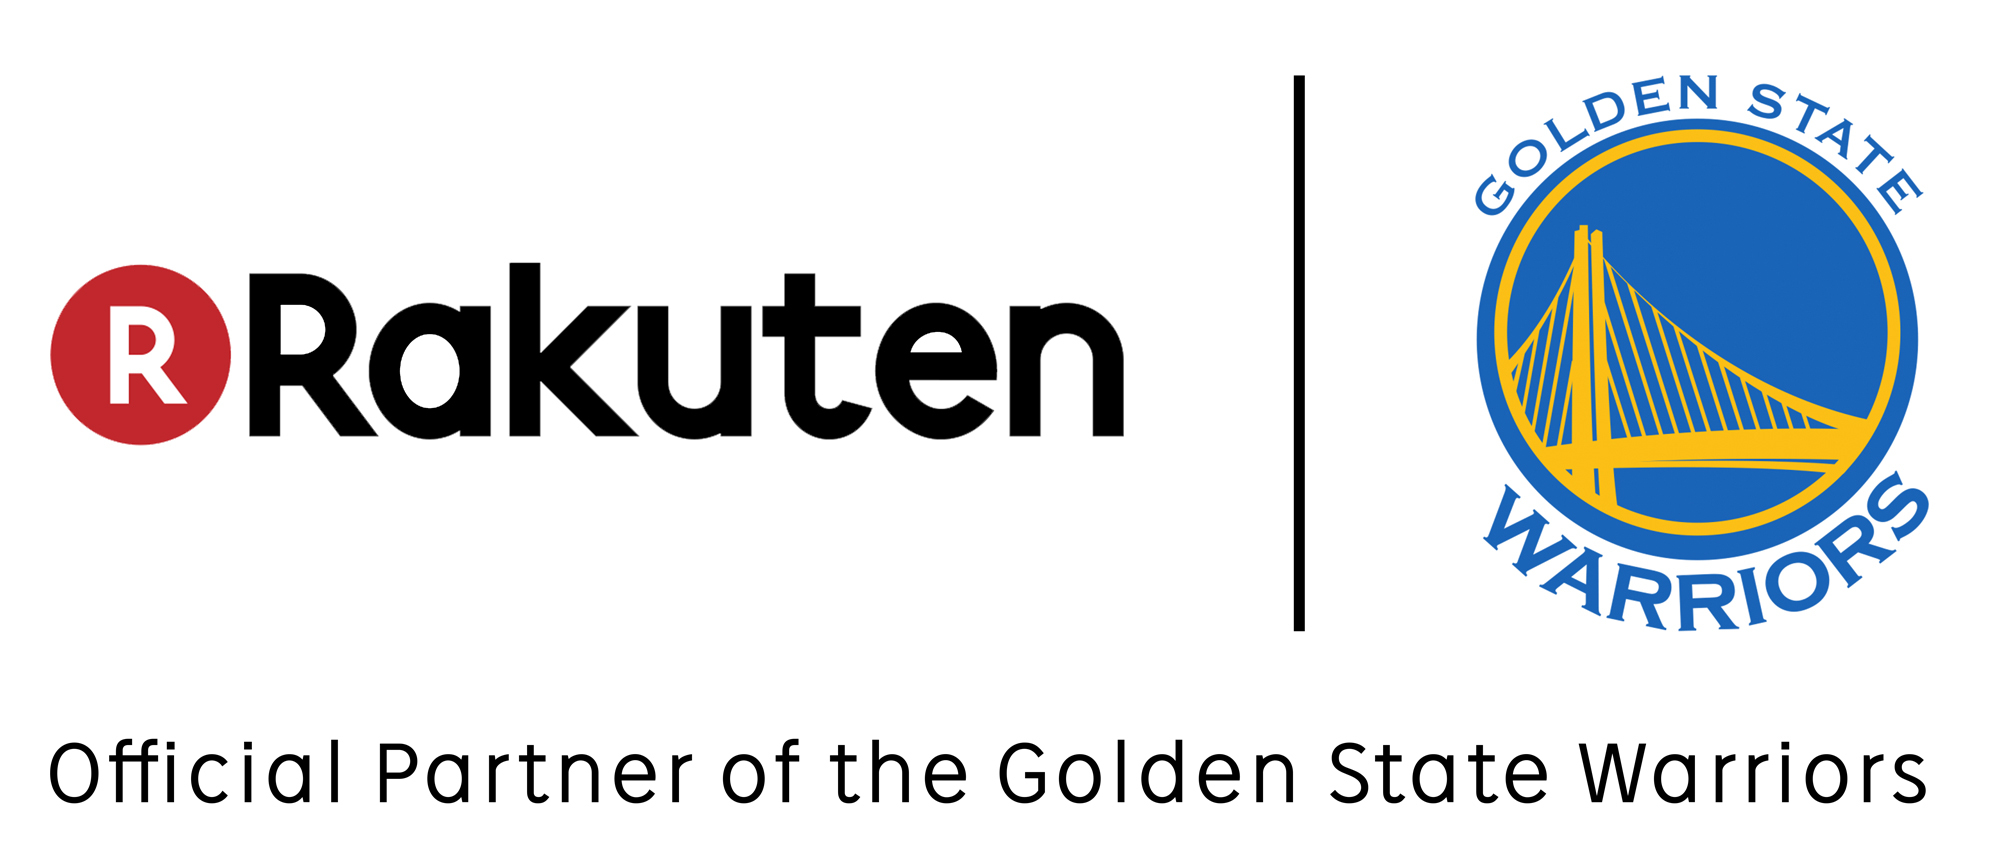 Why is Rakuten on the Warriors' jerseys? Golden State sponsored by